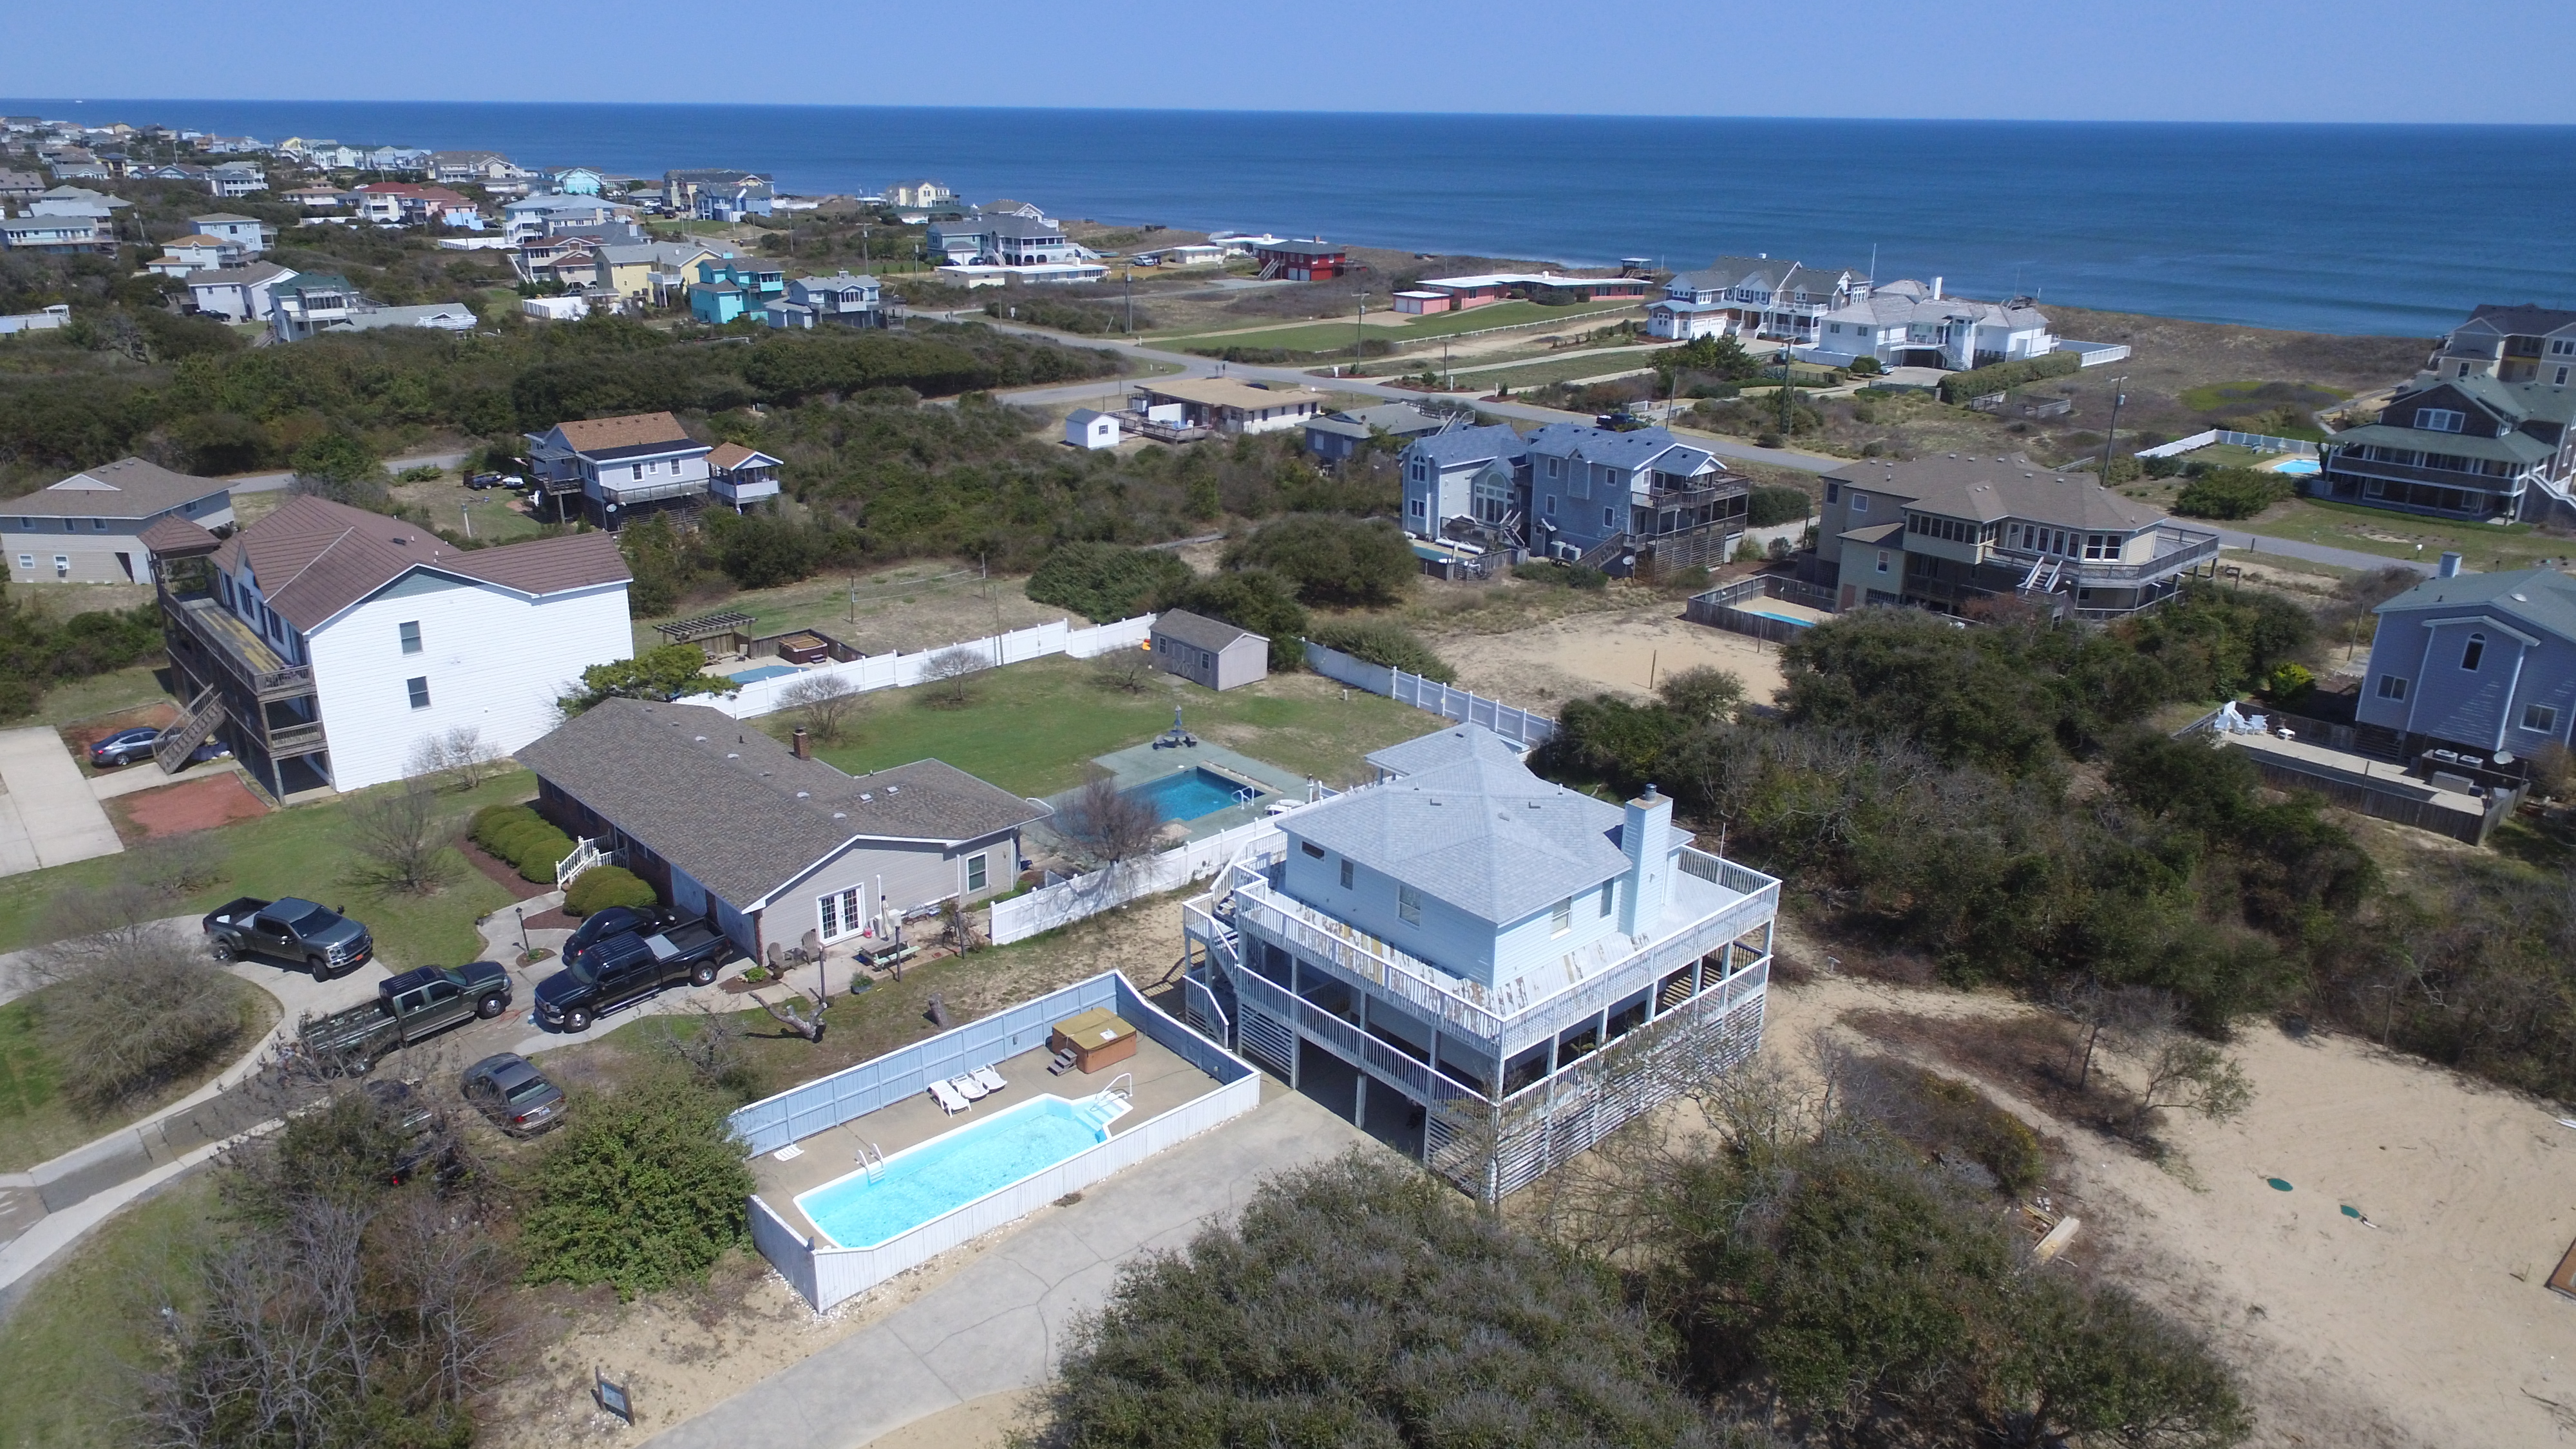 OBX Buying Information is Critical